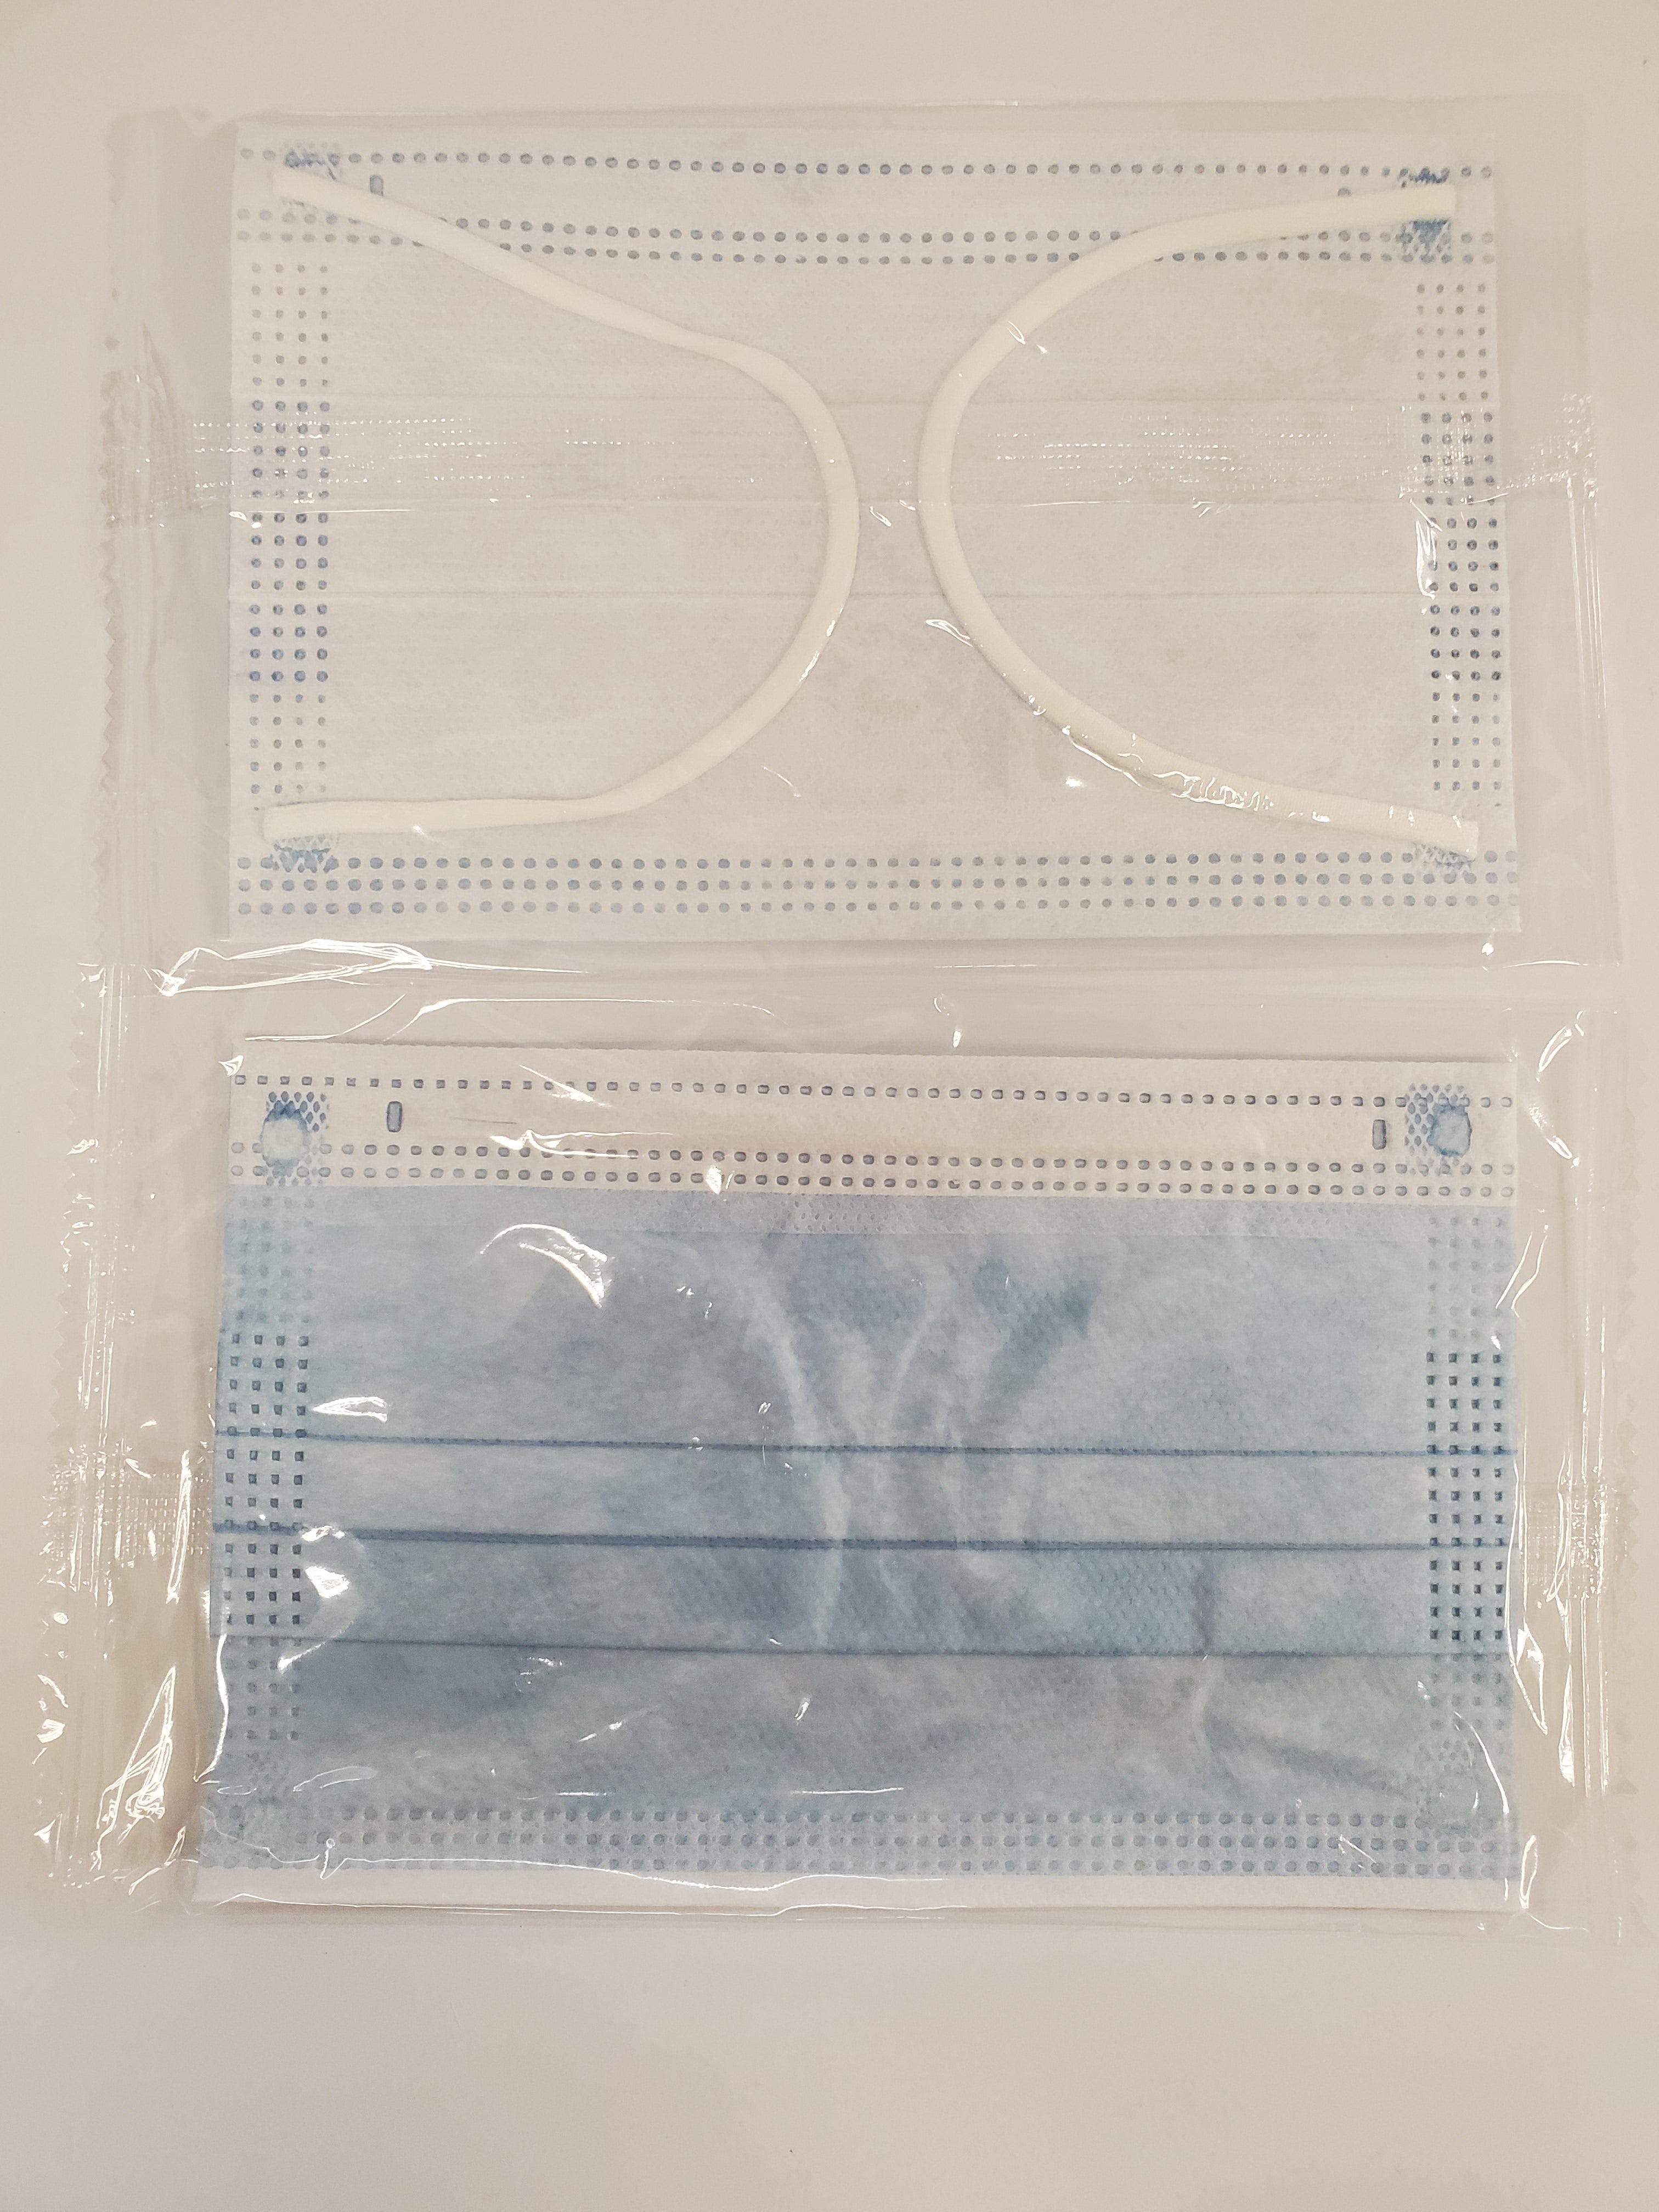 Famicare Surgical Filter Mask For Adolescent